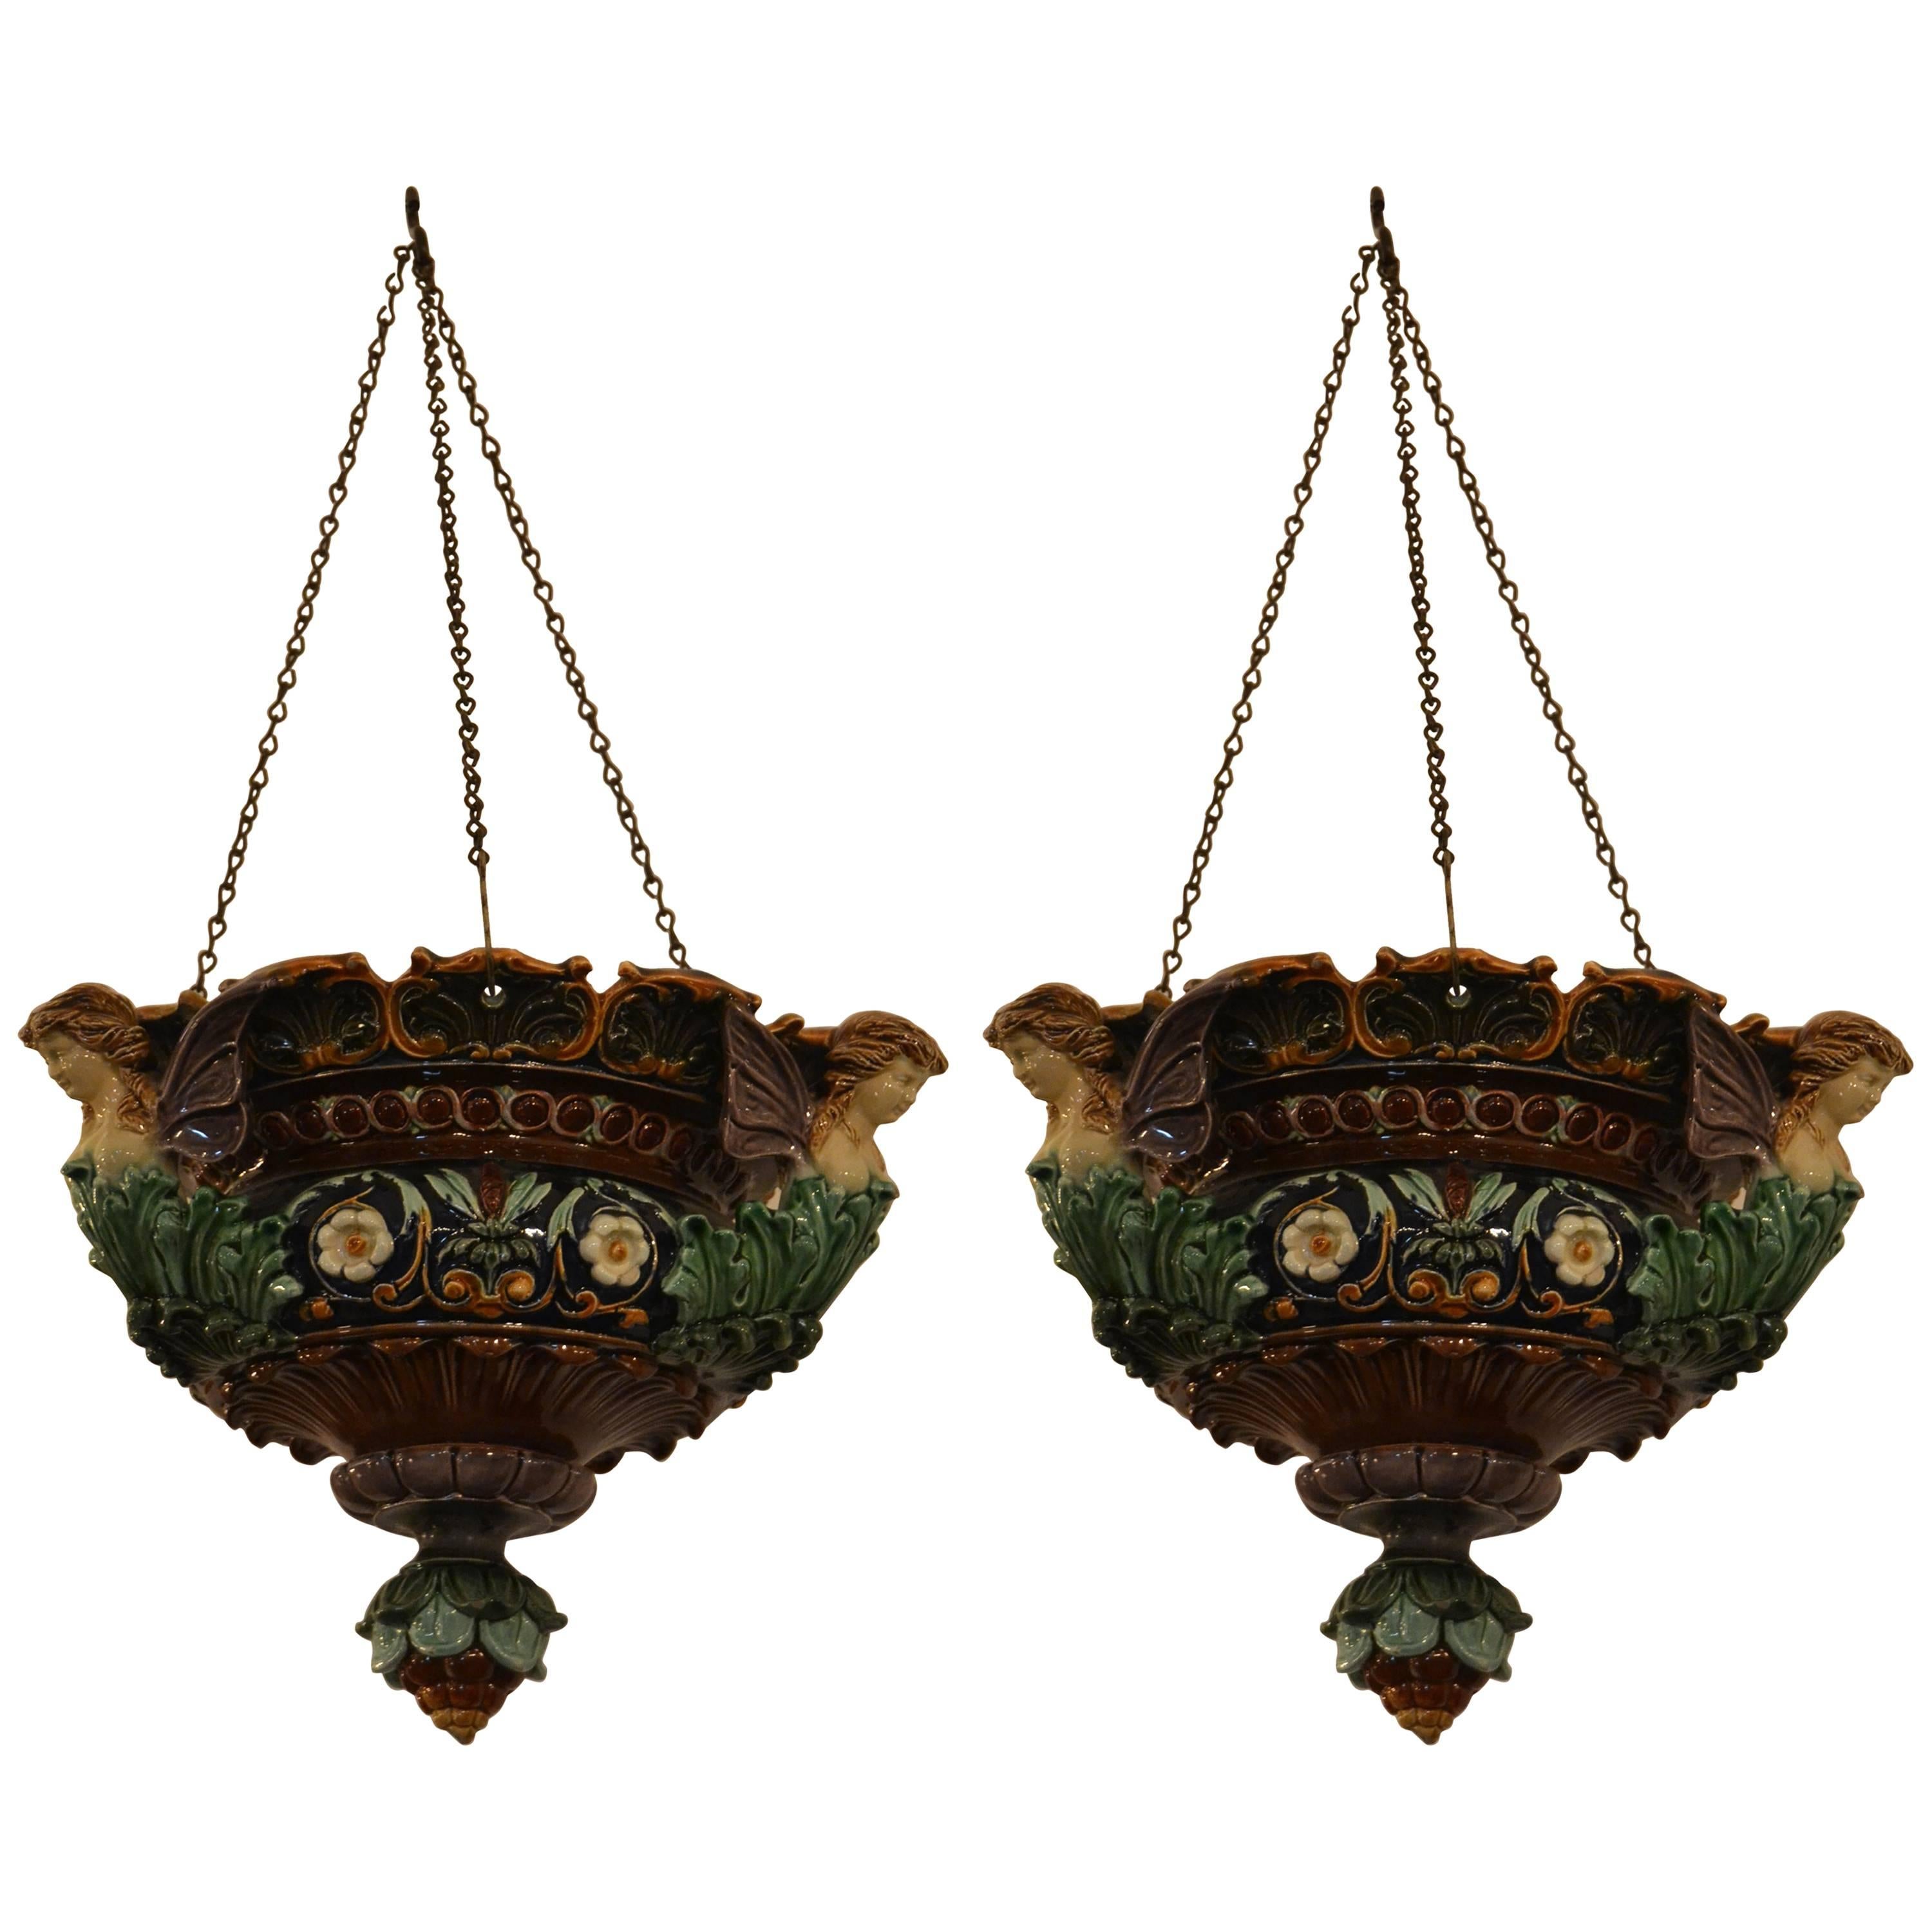 Majolica pieces compliment a variety of styles and these fixtures with their floral and foliate detail in earth tones are appealing.